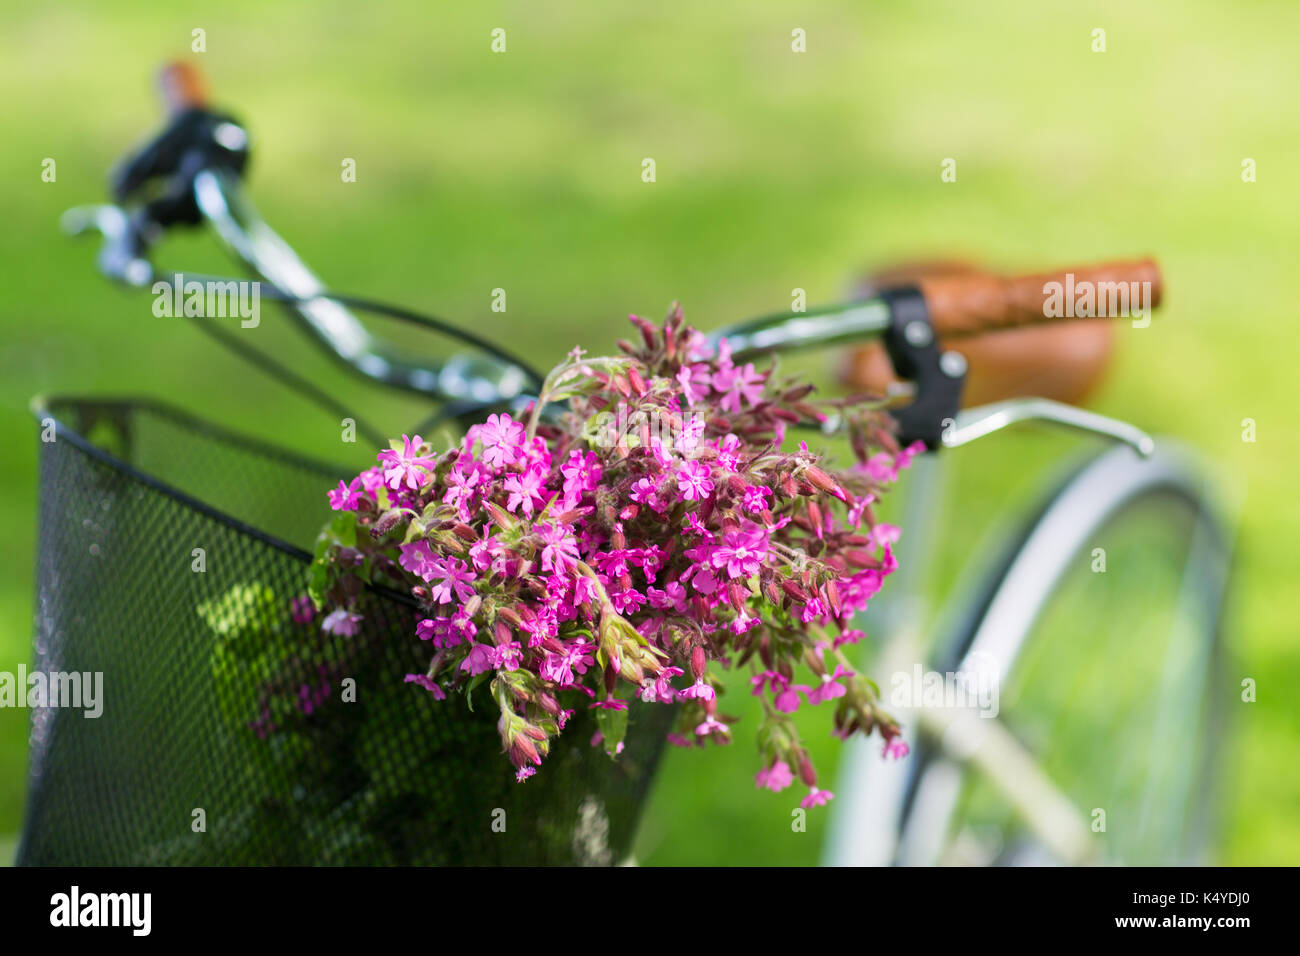 close up of fixie bicycle with flowers in basket Stock Photo